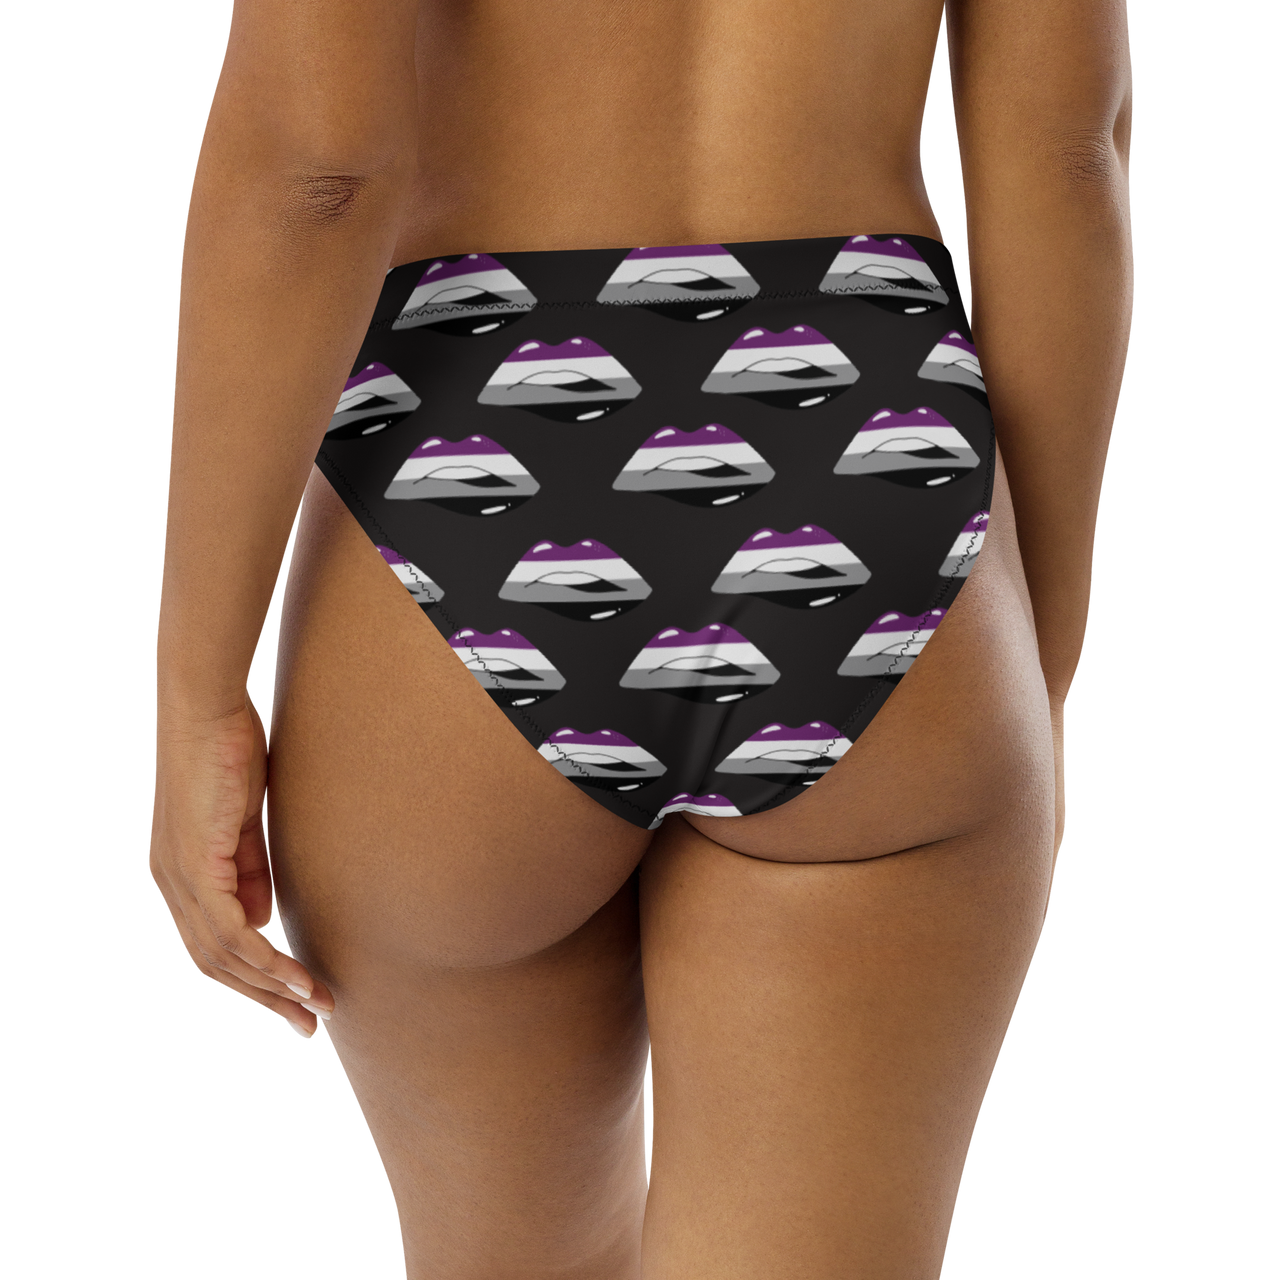 Asexual Flag LGBTQ Kisses Underwear for They/Them Him/Her - Black SHAVA